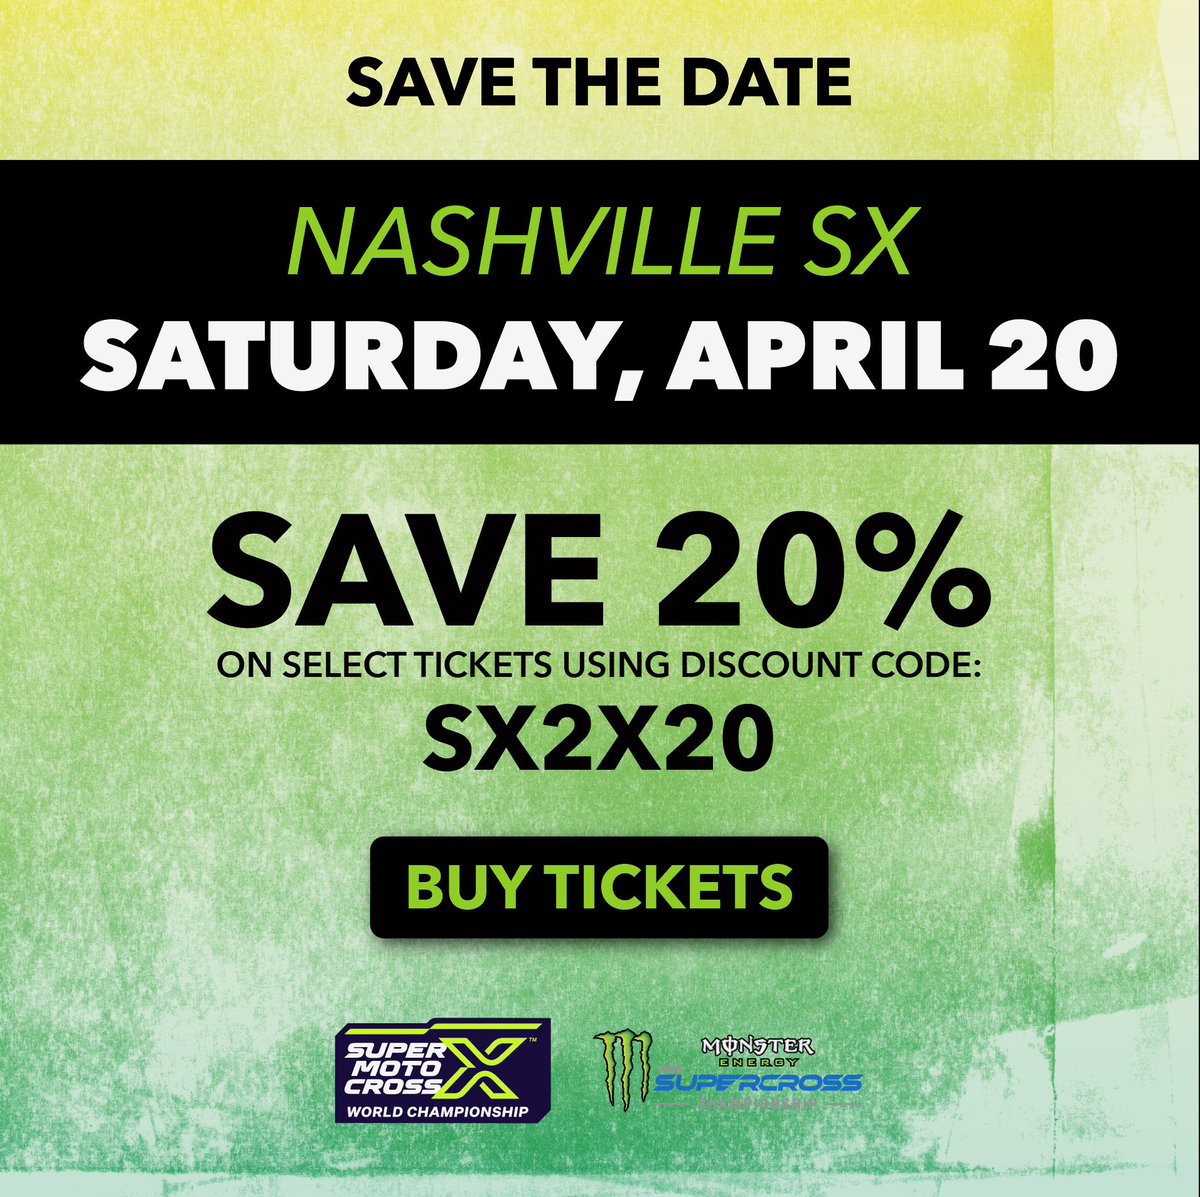 We have a weekend off from GNCC Racing so if you are heading to @supercrosslive in Nashville use this code 🏁 Save 20% on select tickets using code: SX2X20 🎟️ #SupercrossLIVE #SMX #GNCCRacing